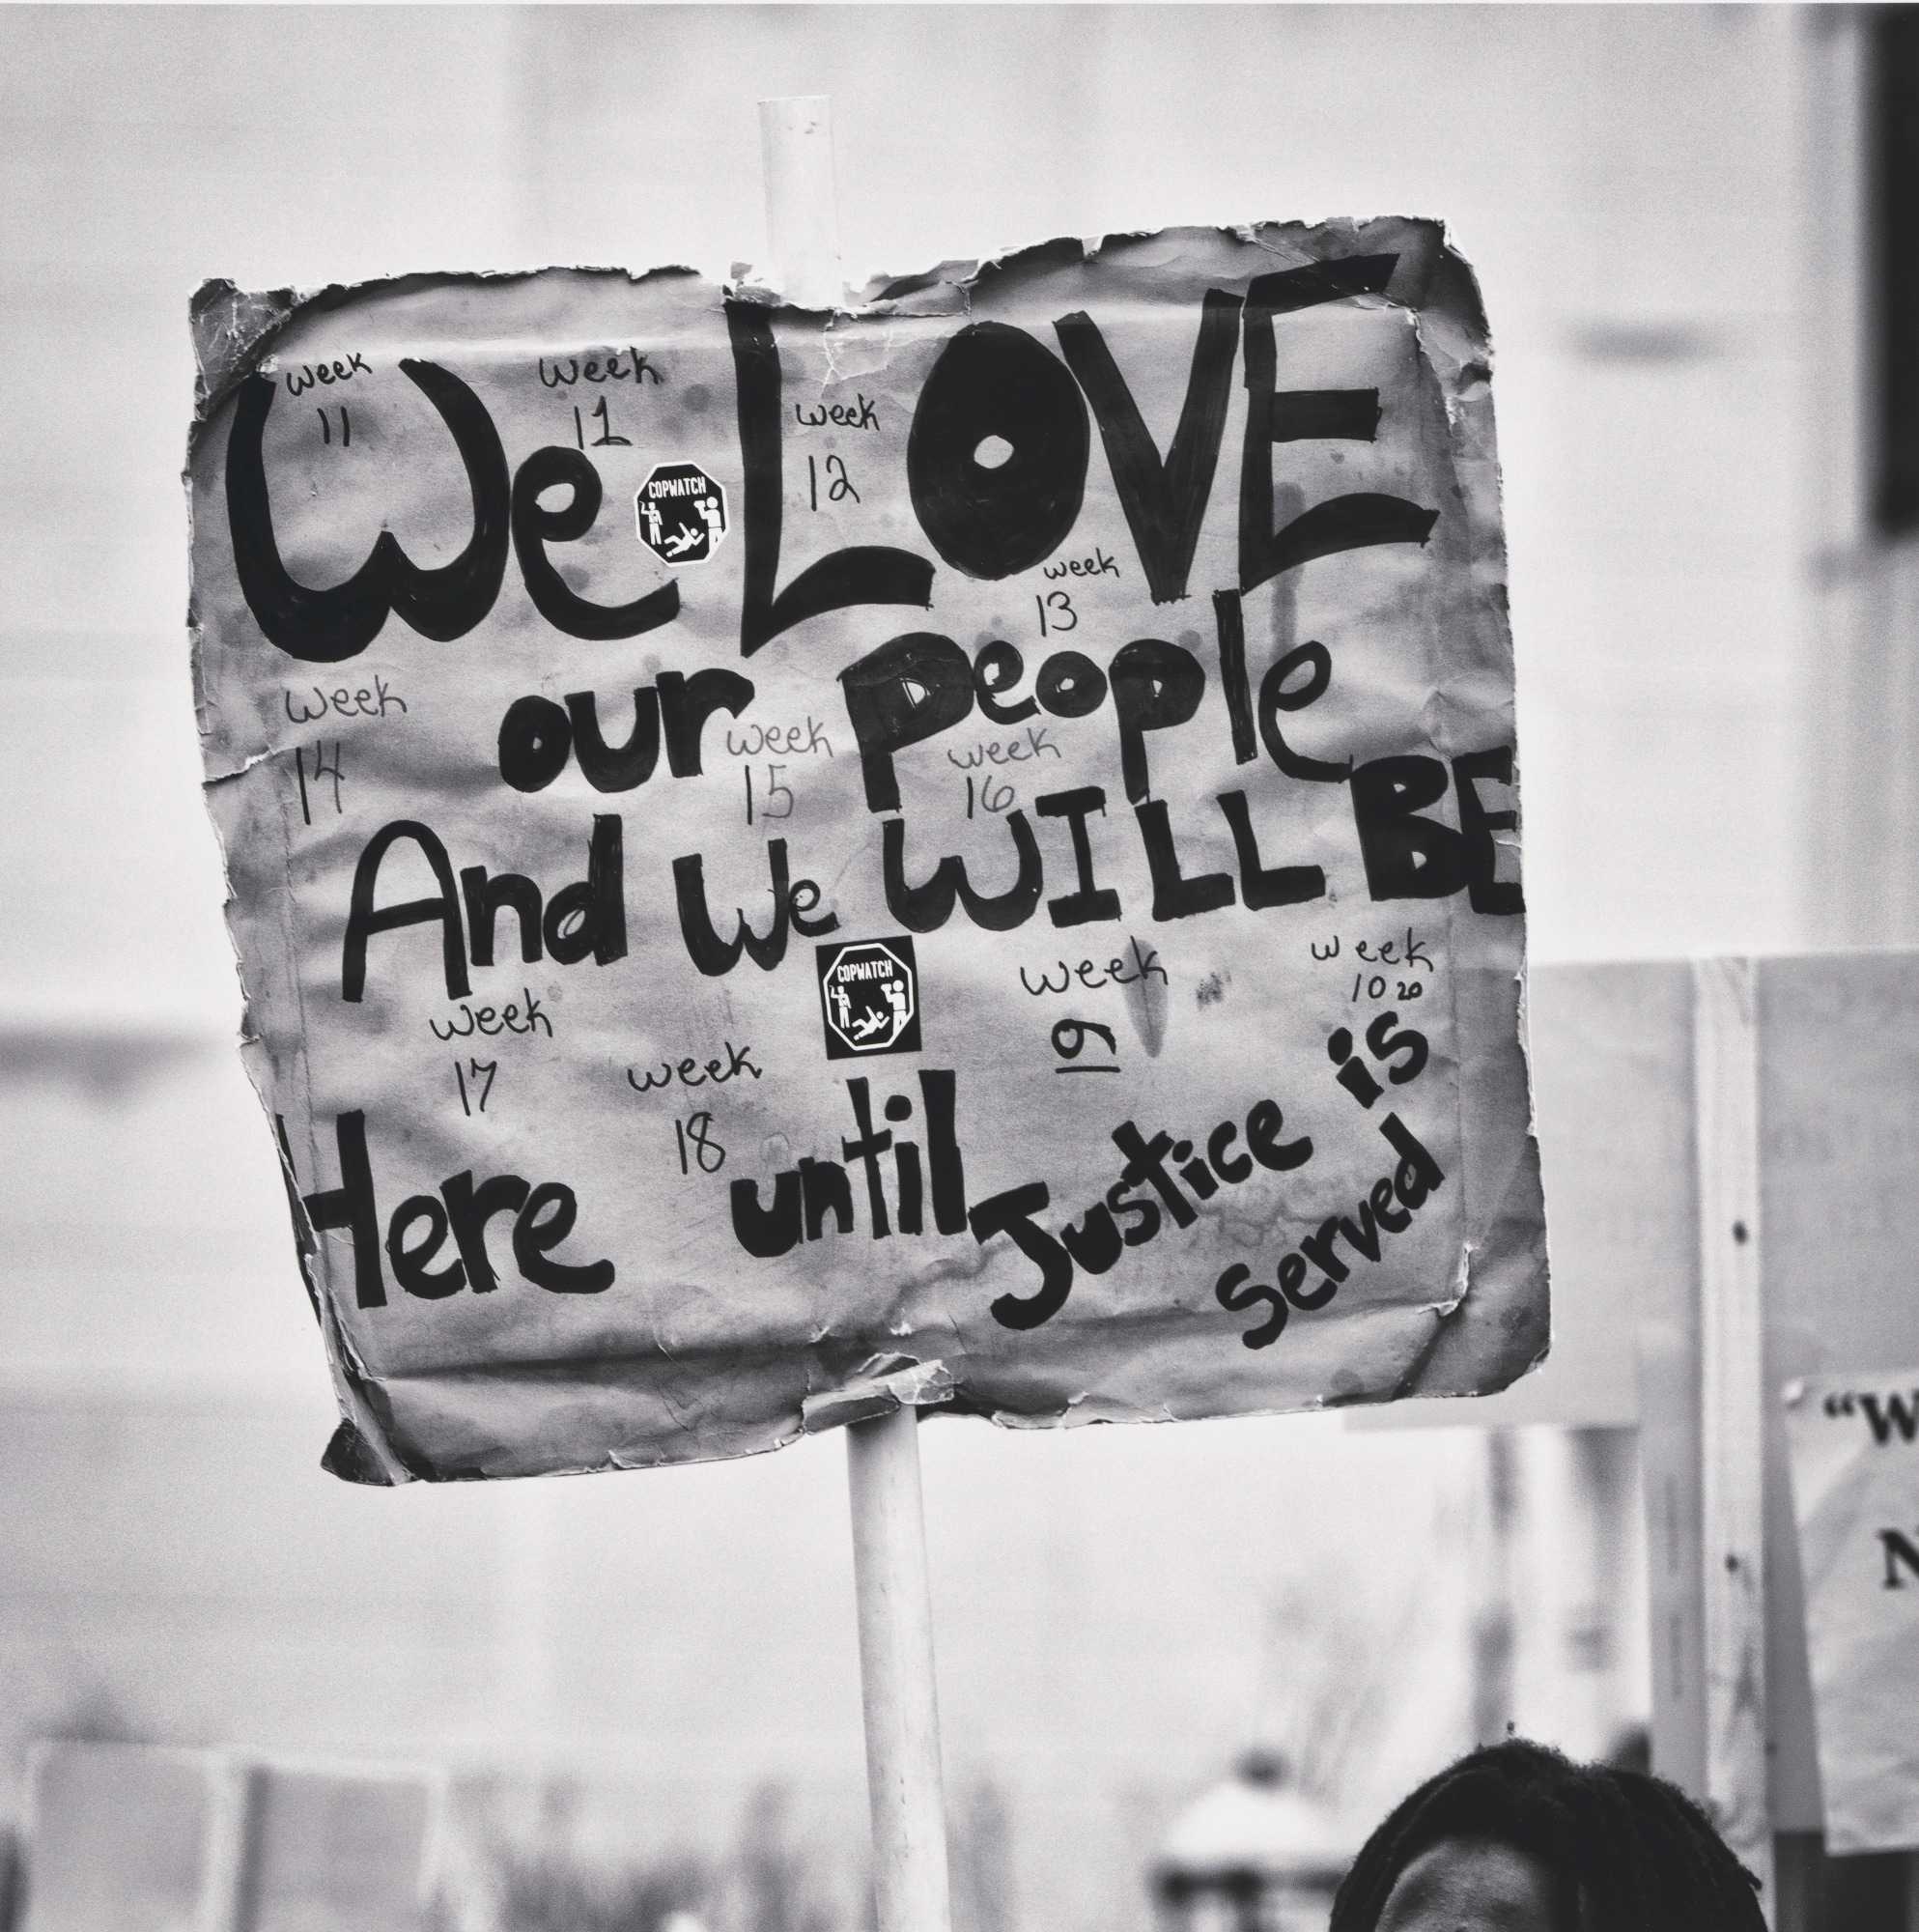 Photograph of protest sign